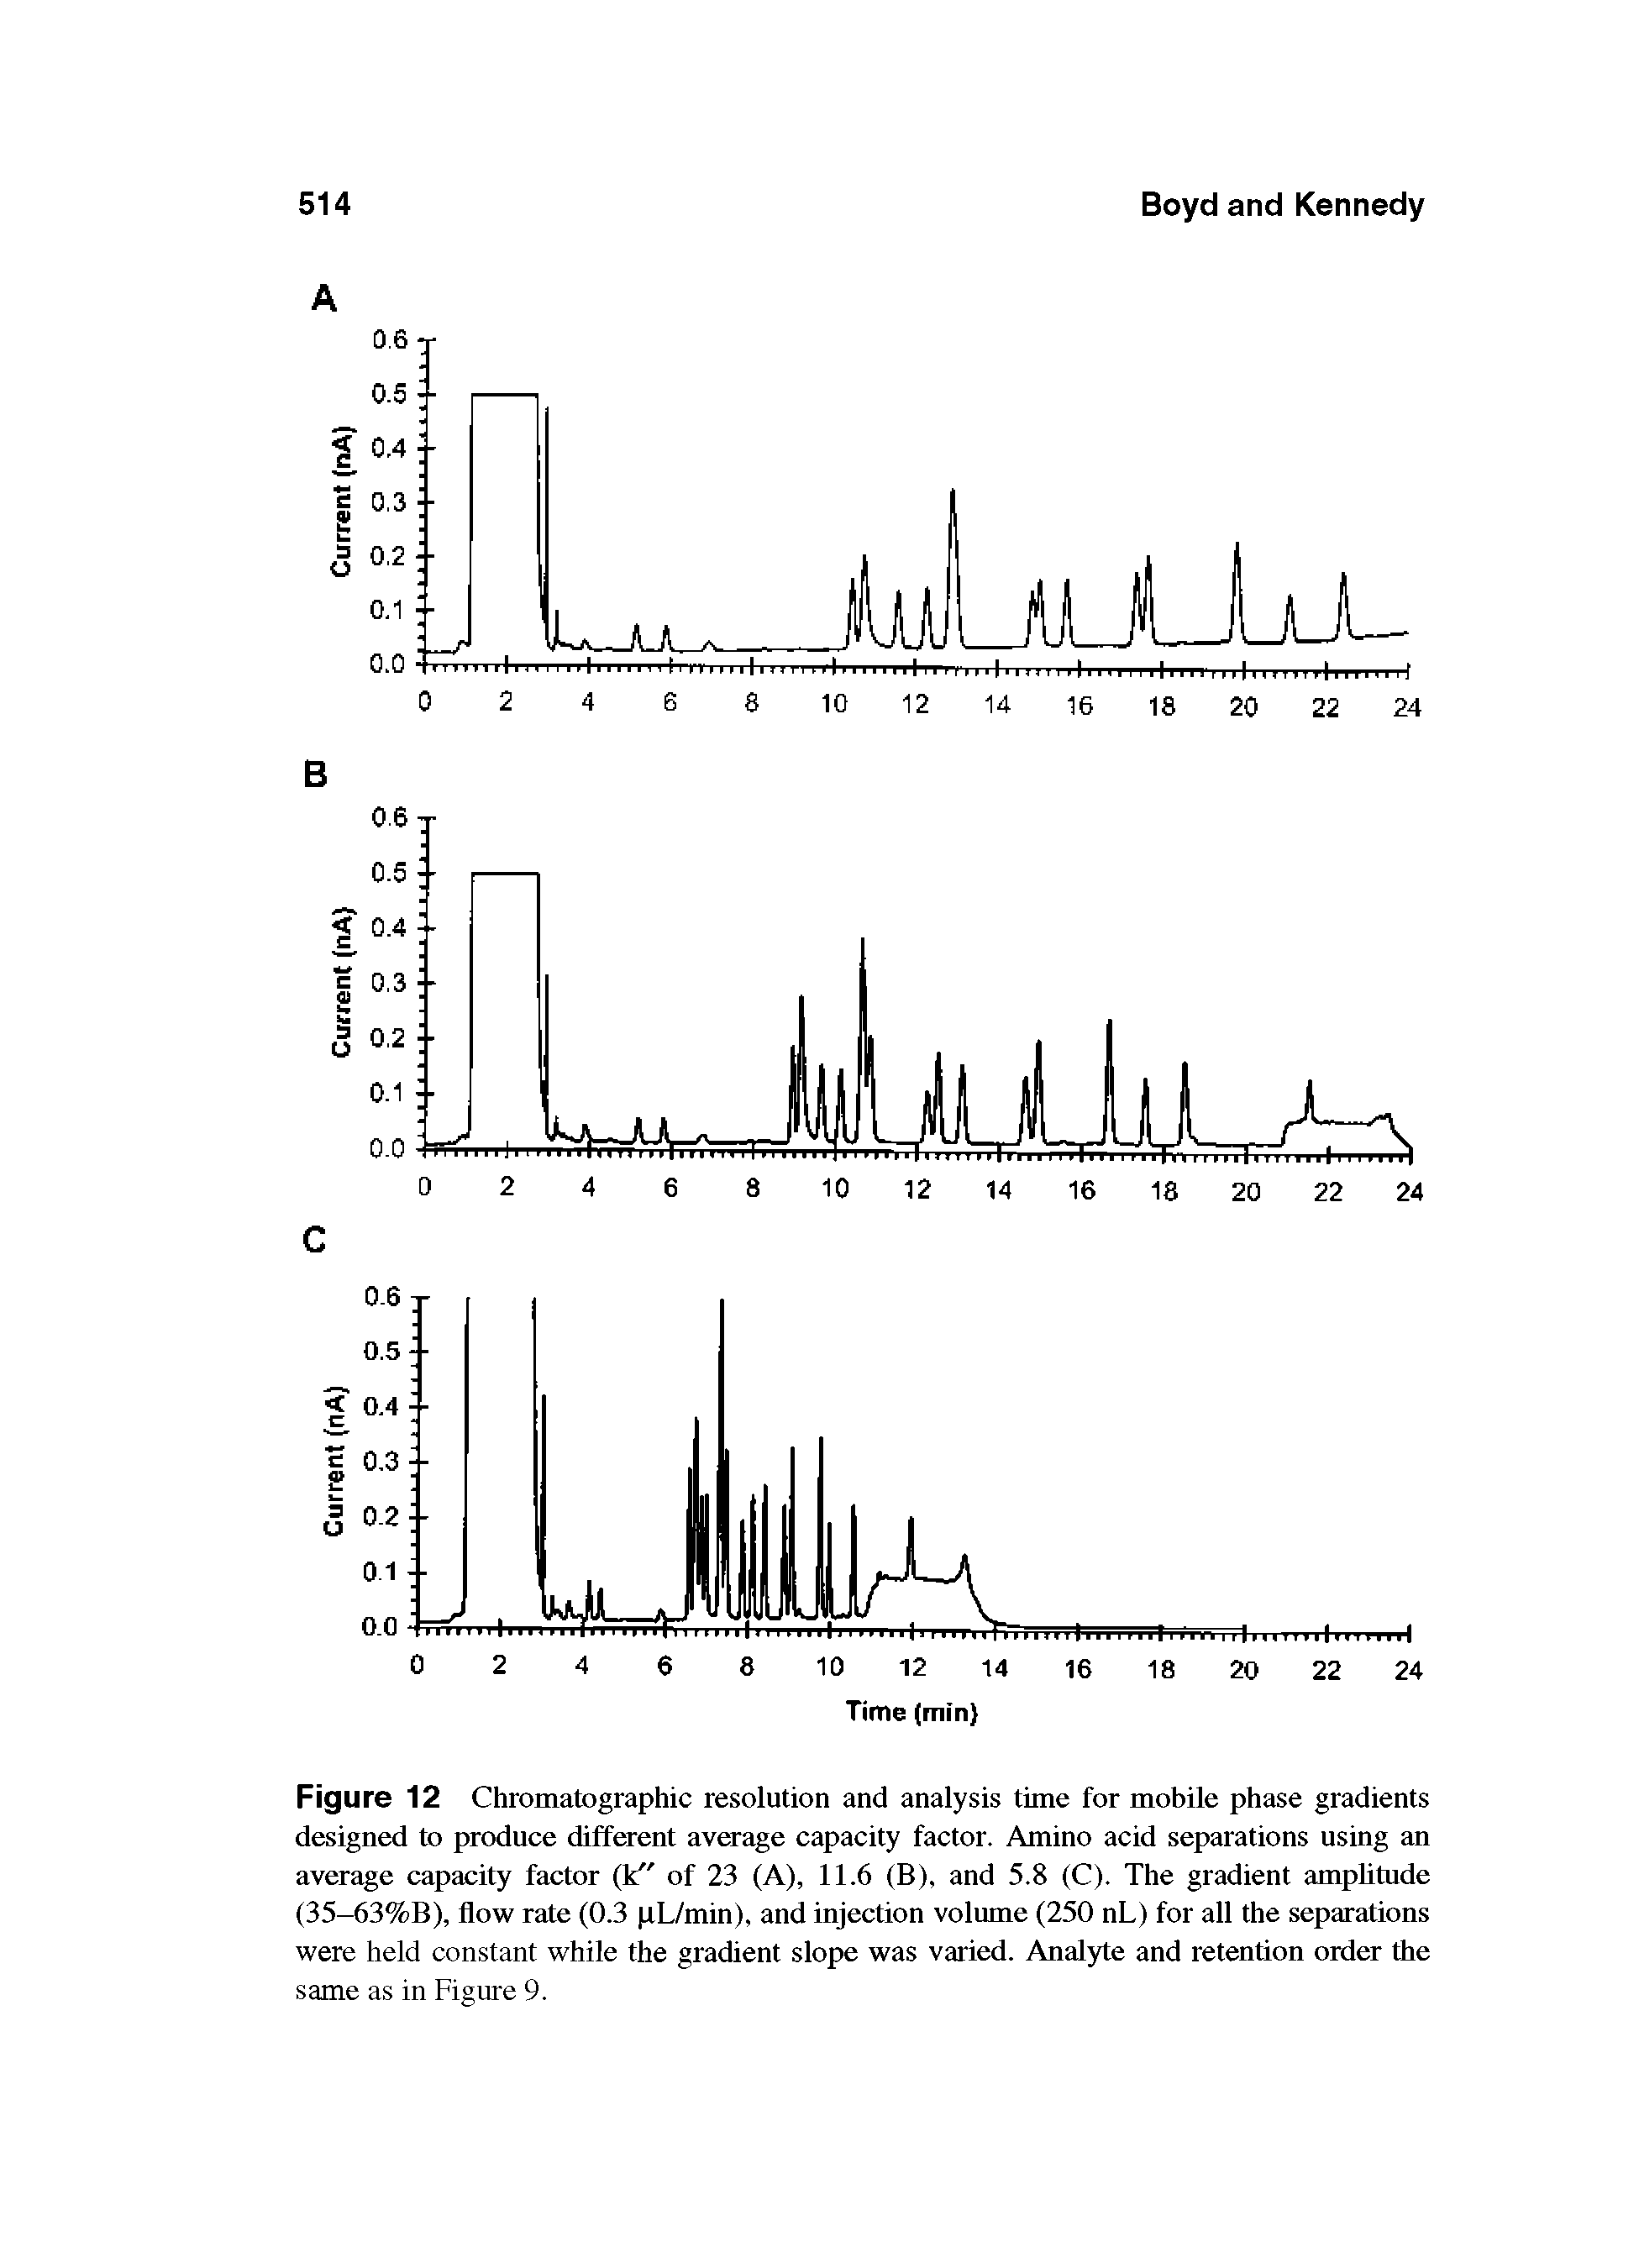 Figure 12 Chromatographic resolution and analysis time for mobile phase gradients designed to produce different average capacity factor. Amino acid separations using an average capacity factor (k" of 23 (A), 11.6 (B), and 5.8 (C). The gradient amplitude (35-63%B), flow rate (0.3 pL/min), and injection volume (250 nL) for all the separations were held constant while the gradient slope was varied. Anal5d e and retention order the same as in Figure 9.